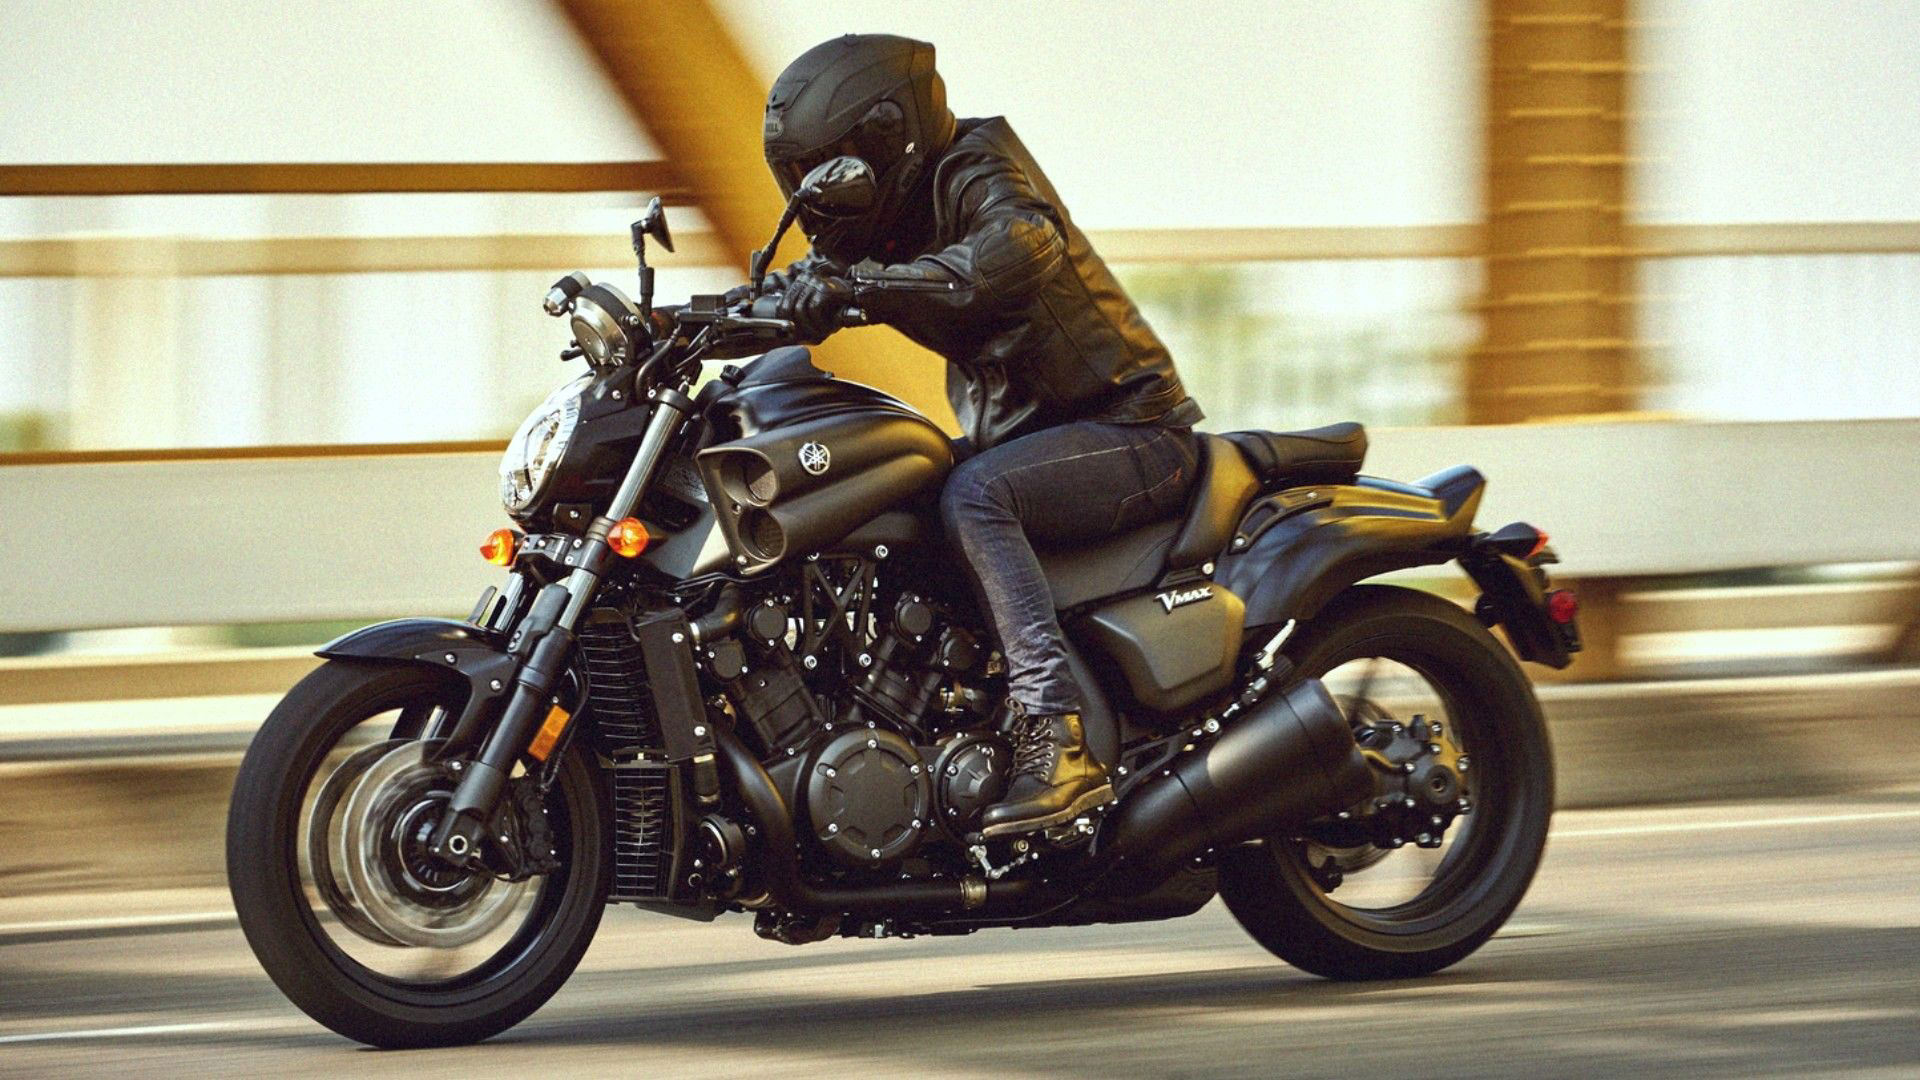 10 Discontinued Motorcycles That Need To Make A Comeback